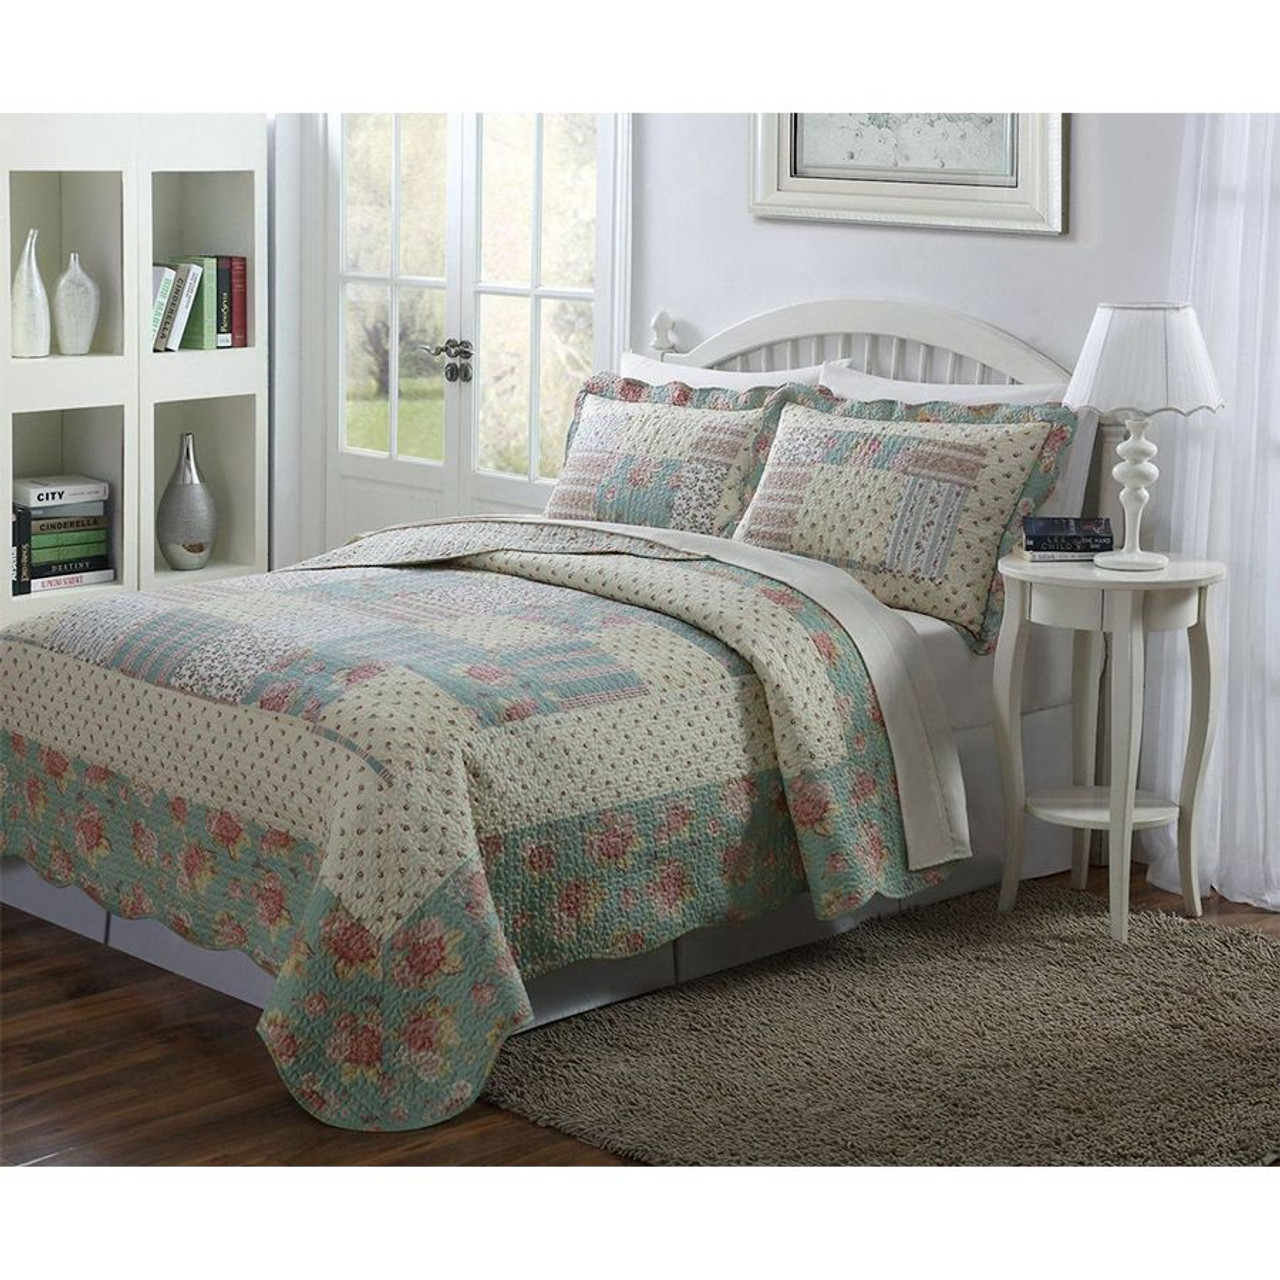 Bedspreads Coverlets Sets Home Kitchen Legacy Decor 3 Pc